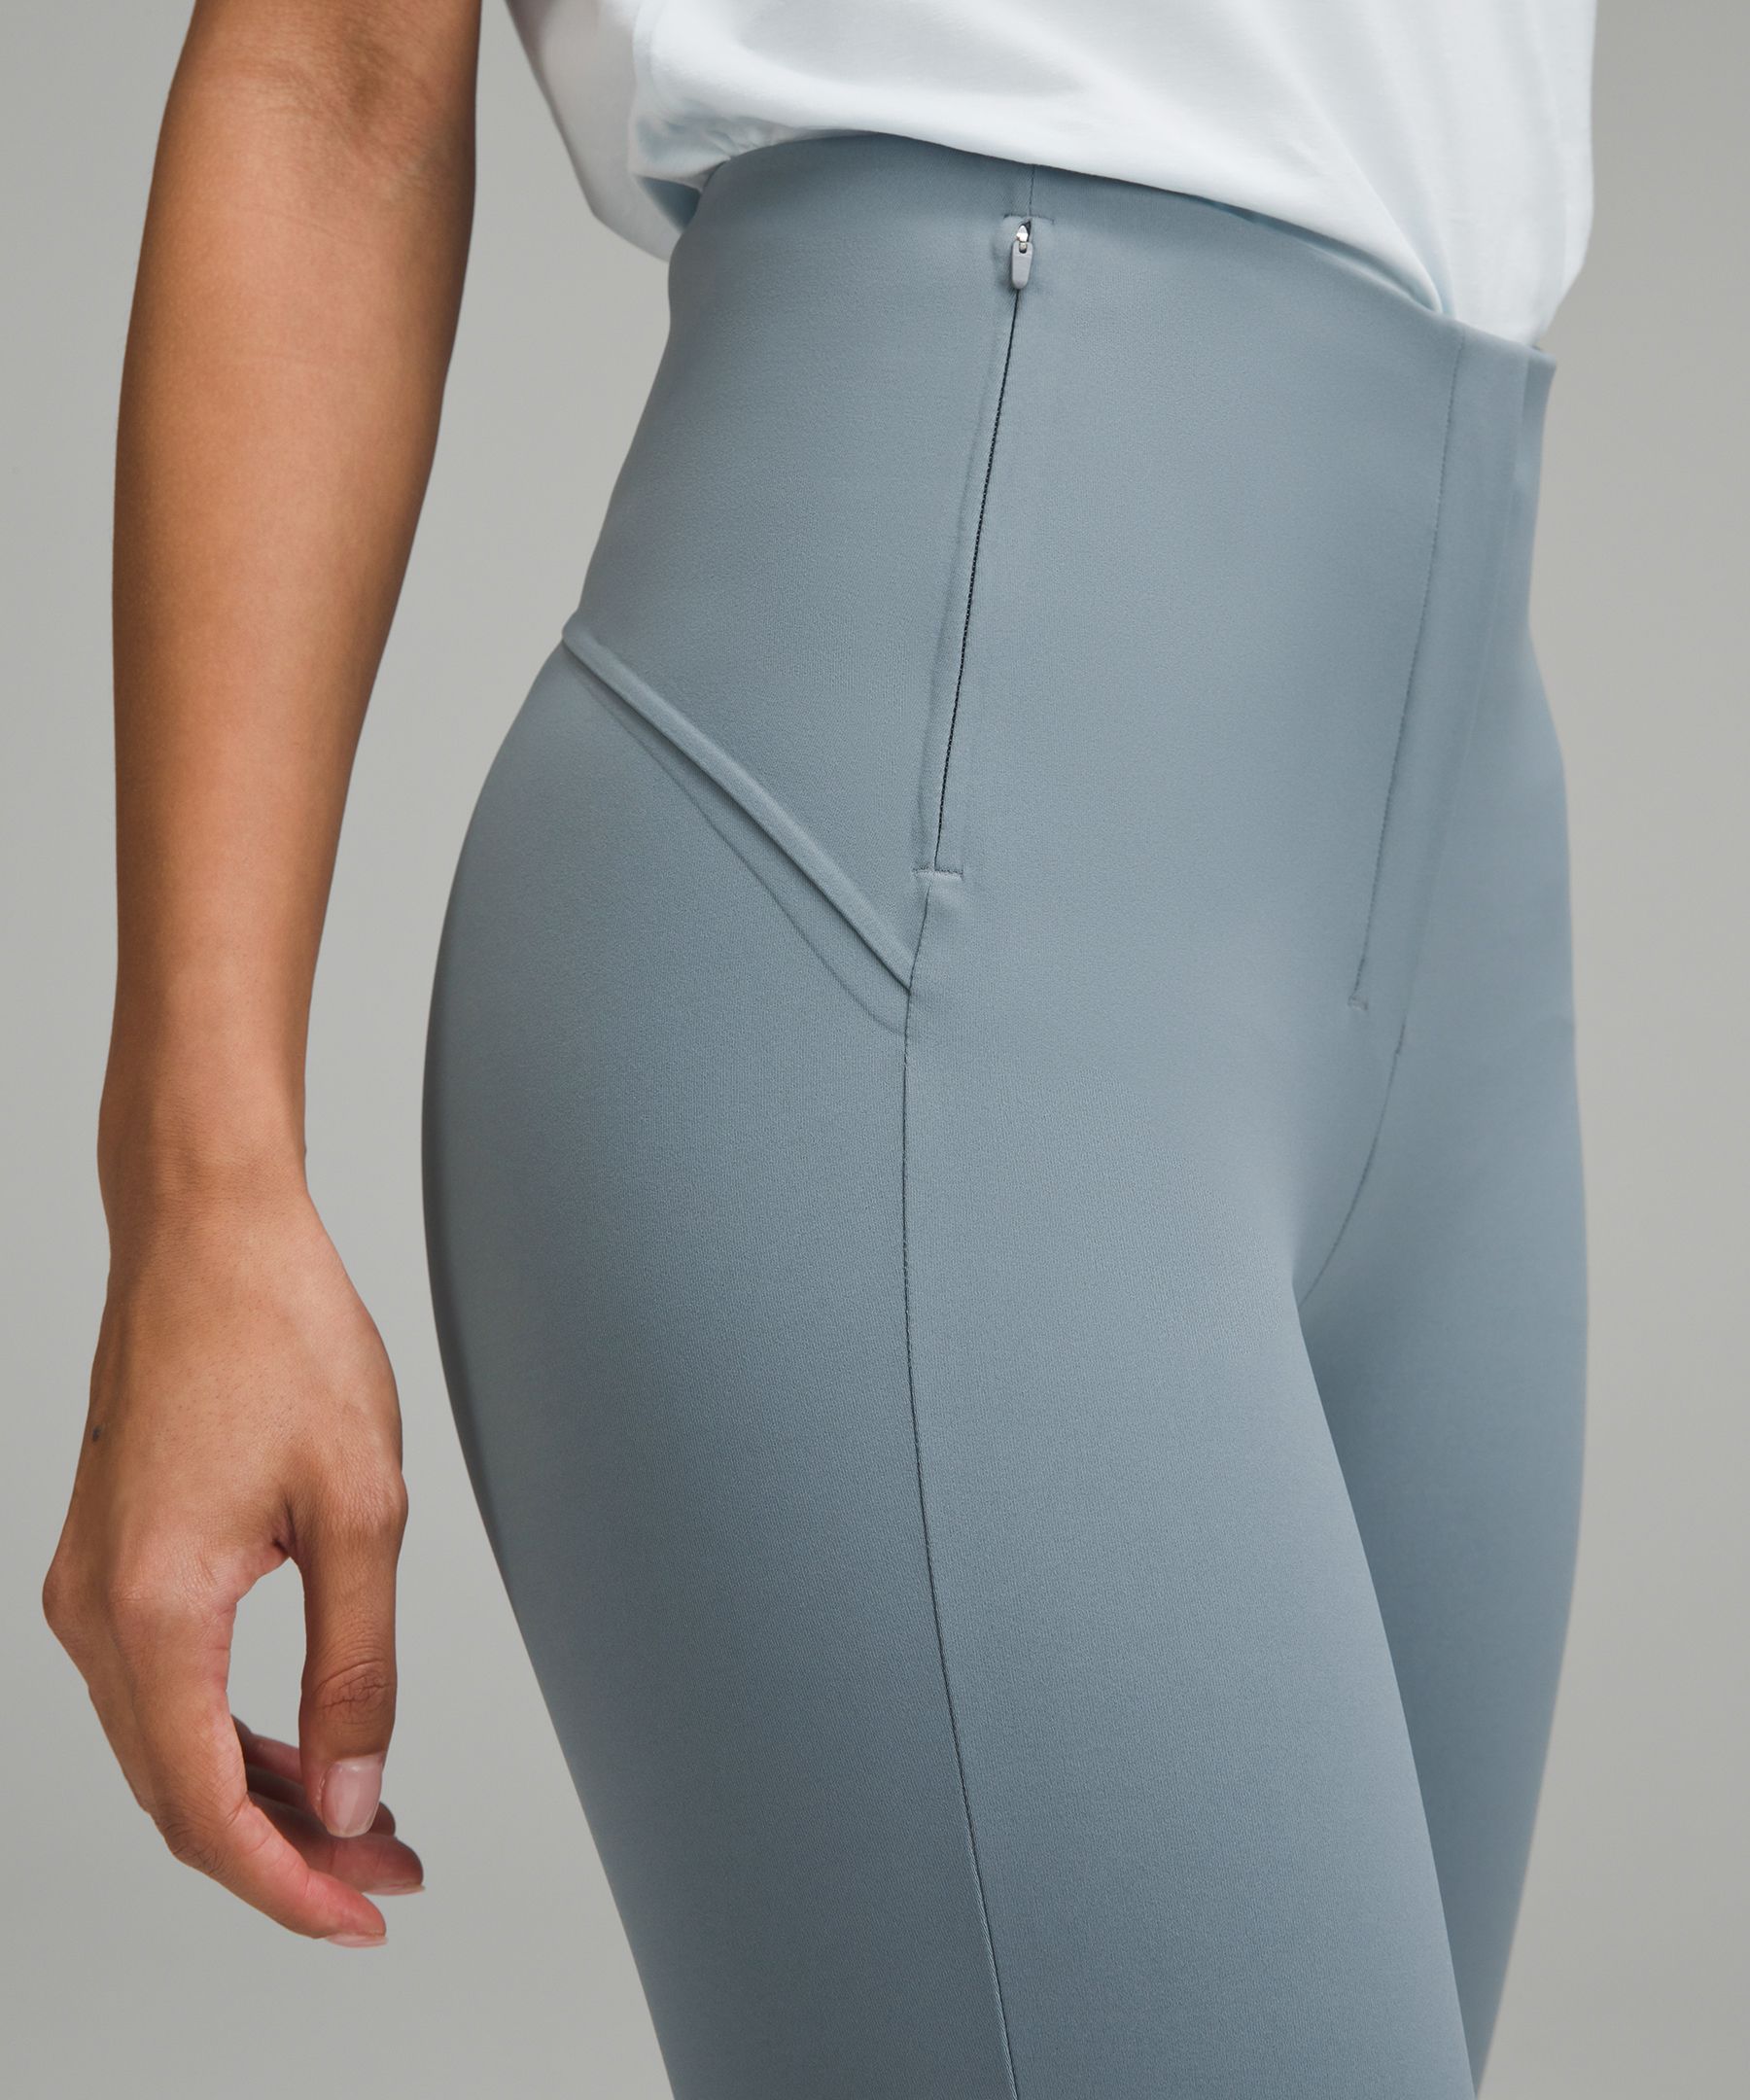 Old Navy, Lululemon: Traces of Toxic Chemicals Found in Yoga Pants